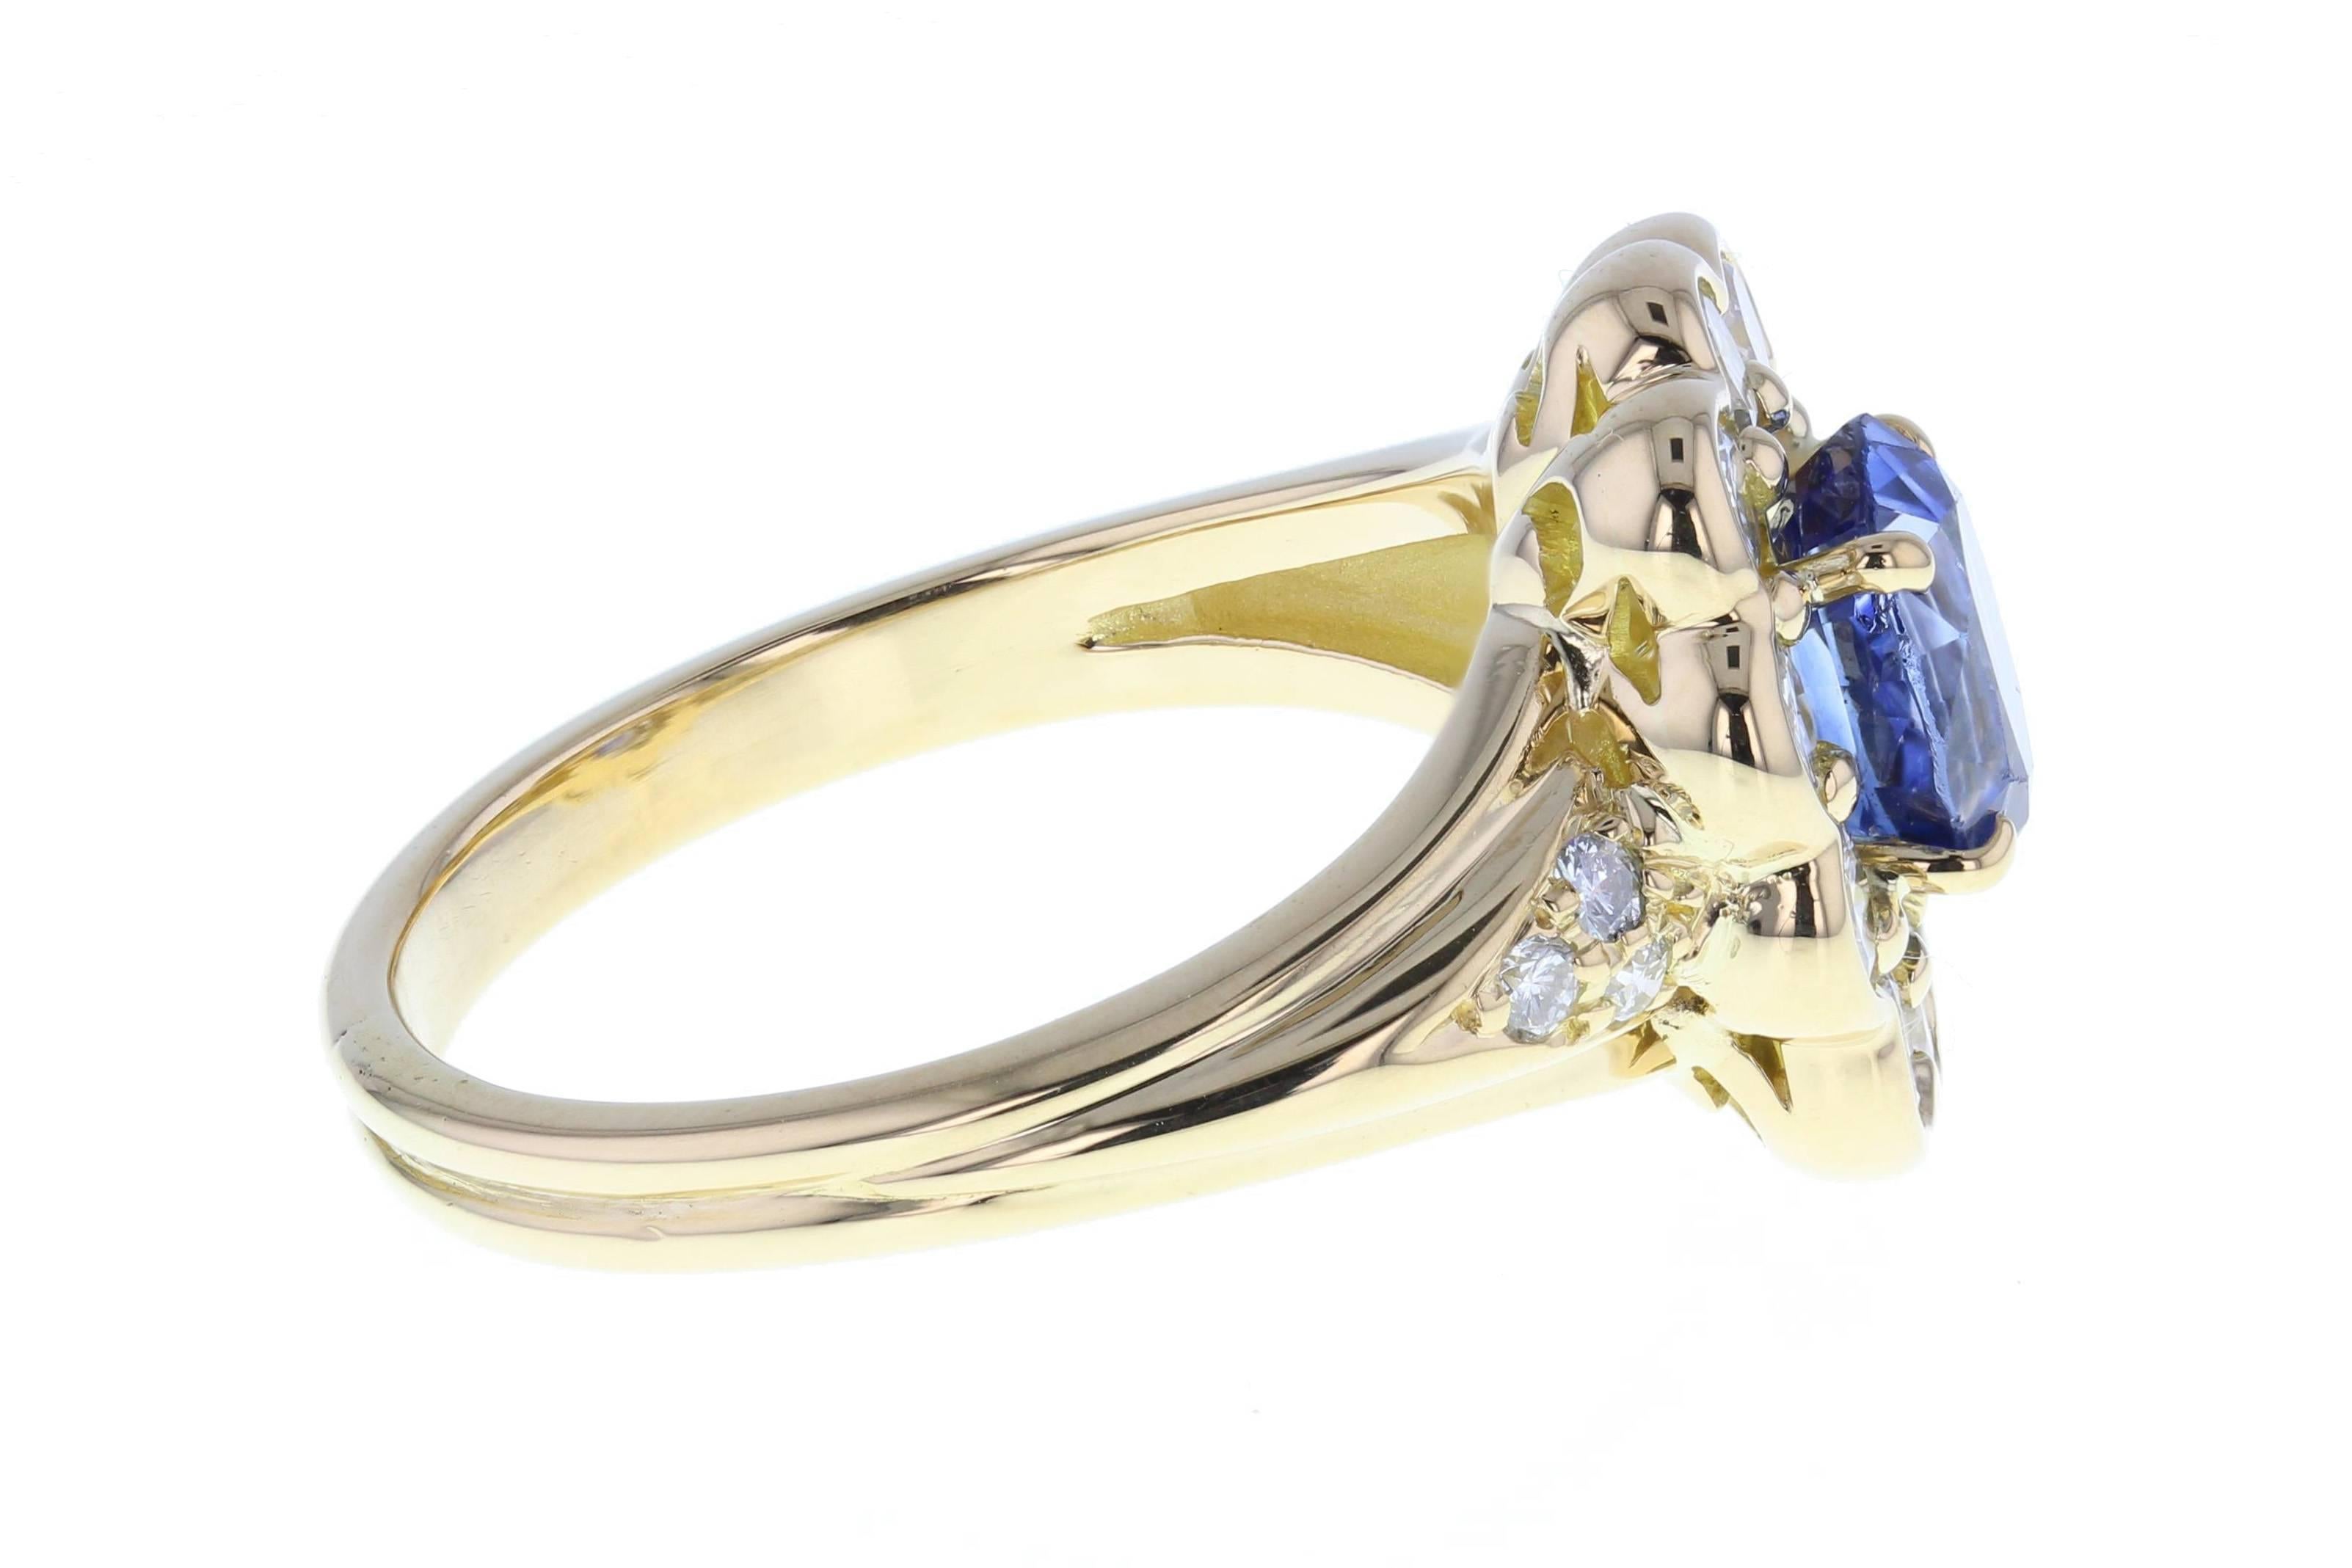 The central oval-cut sapphire exhibits a stunning blue colour with lilac tones. The exceptionally coloured sapphire is mounted in four discreet claws and surrounded by 10 round, brilliant-cut diamonds in a rub-over setting. Some diamond detailing to